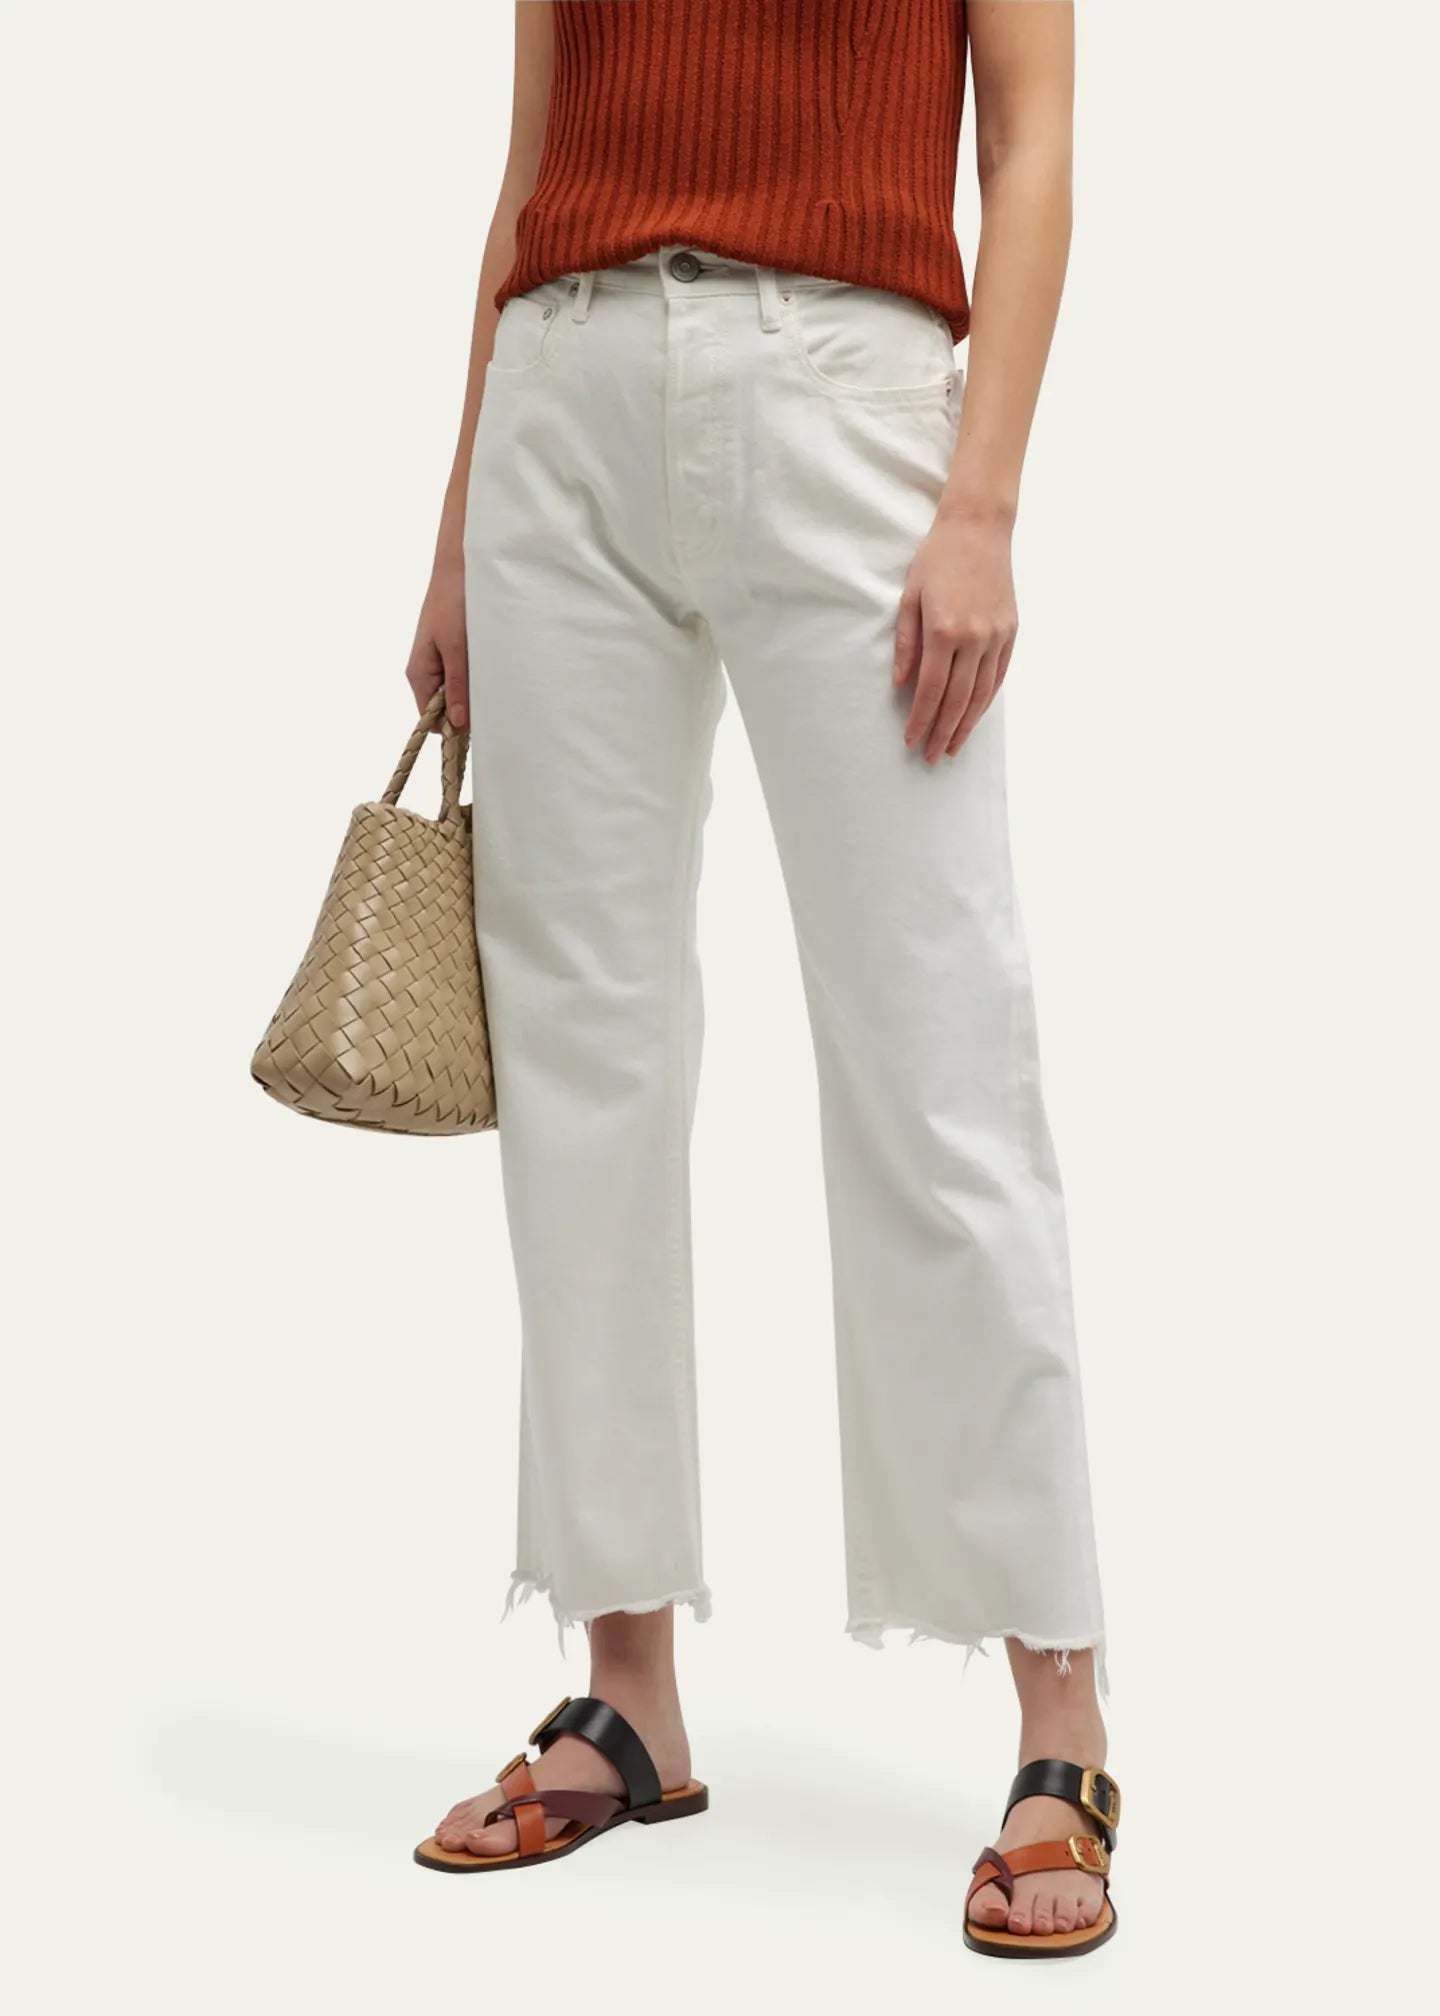 Moussy Aurora Wide Straight Denim, white jeans, cropped jeans, white denim, women's clothing